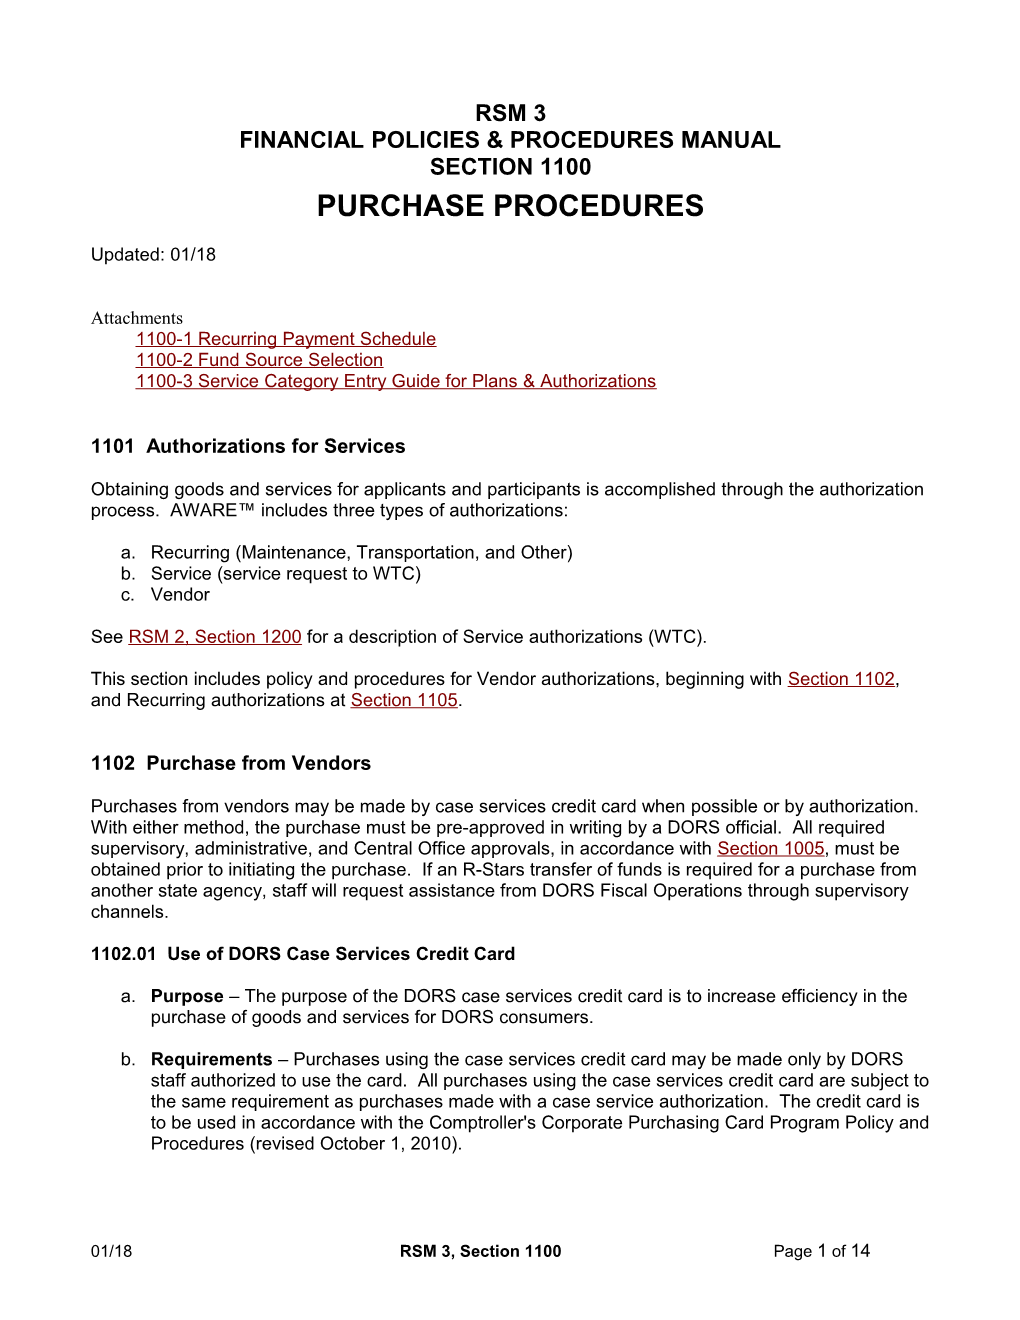 RSM 3, Section 1100: Purchase Procedures